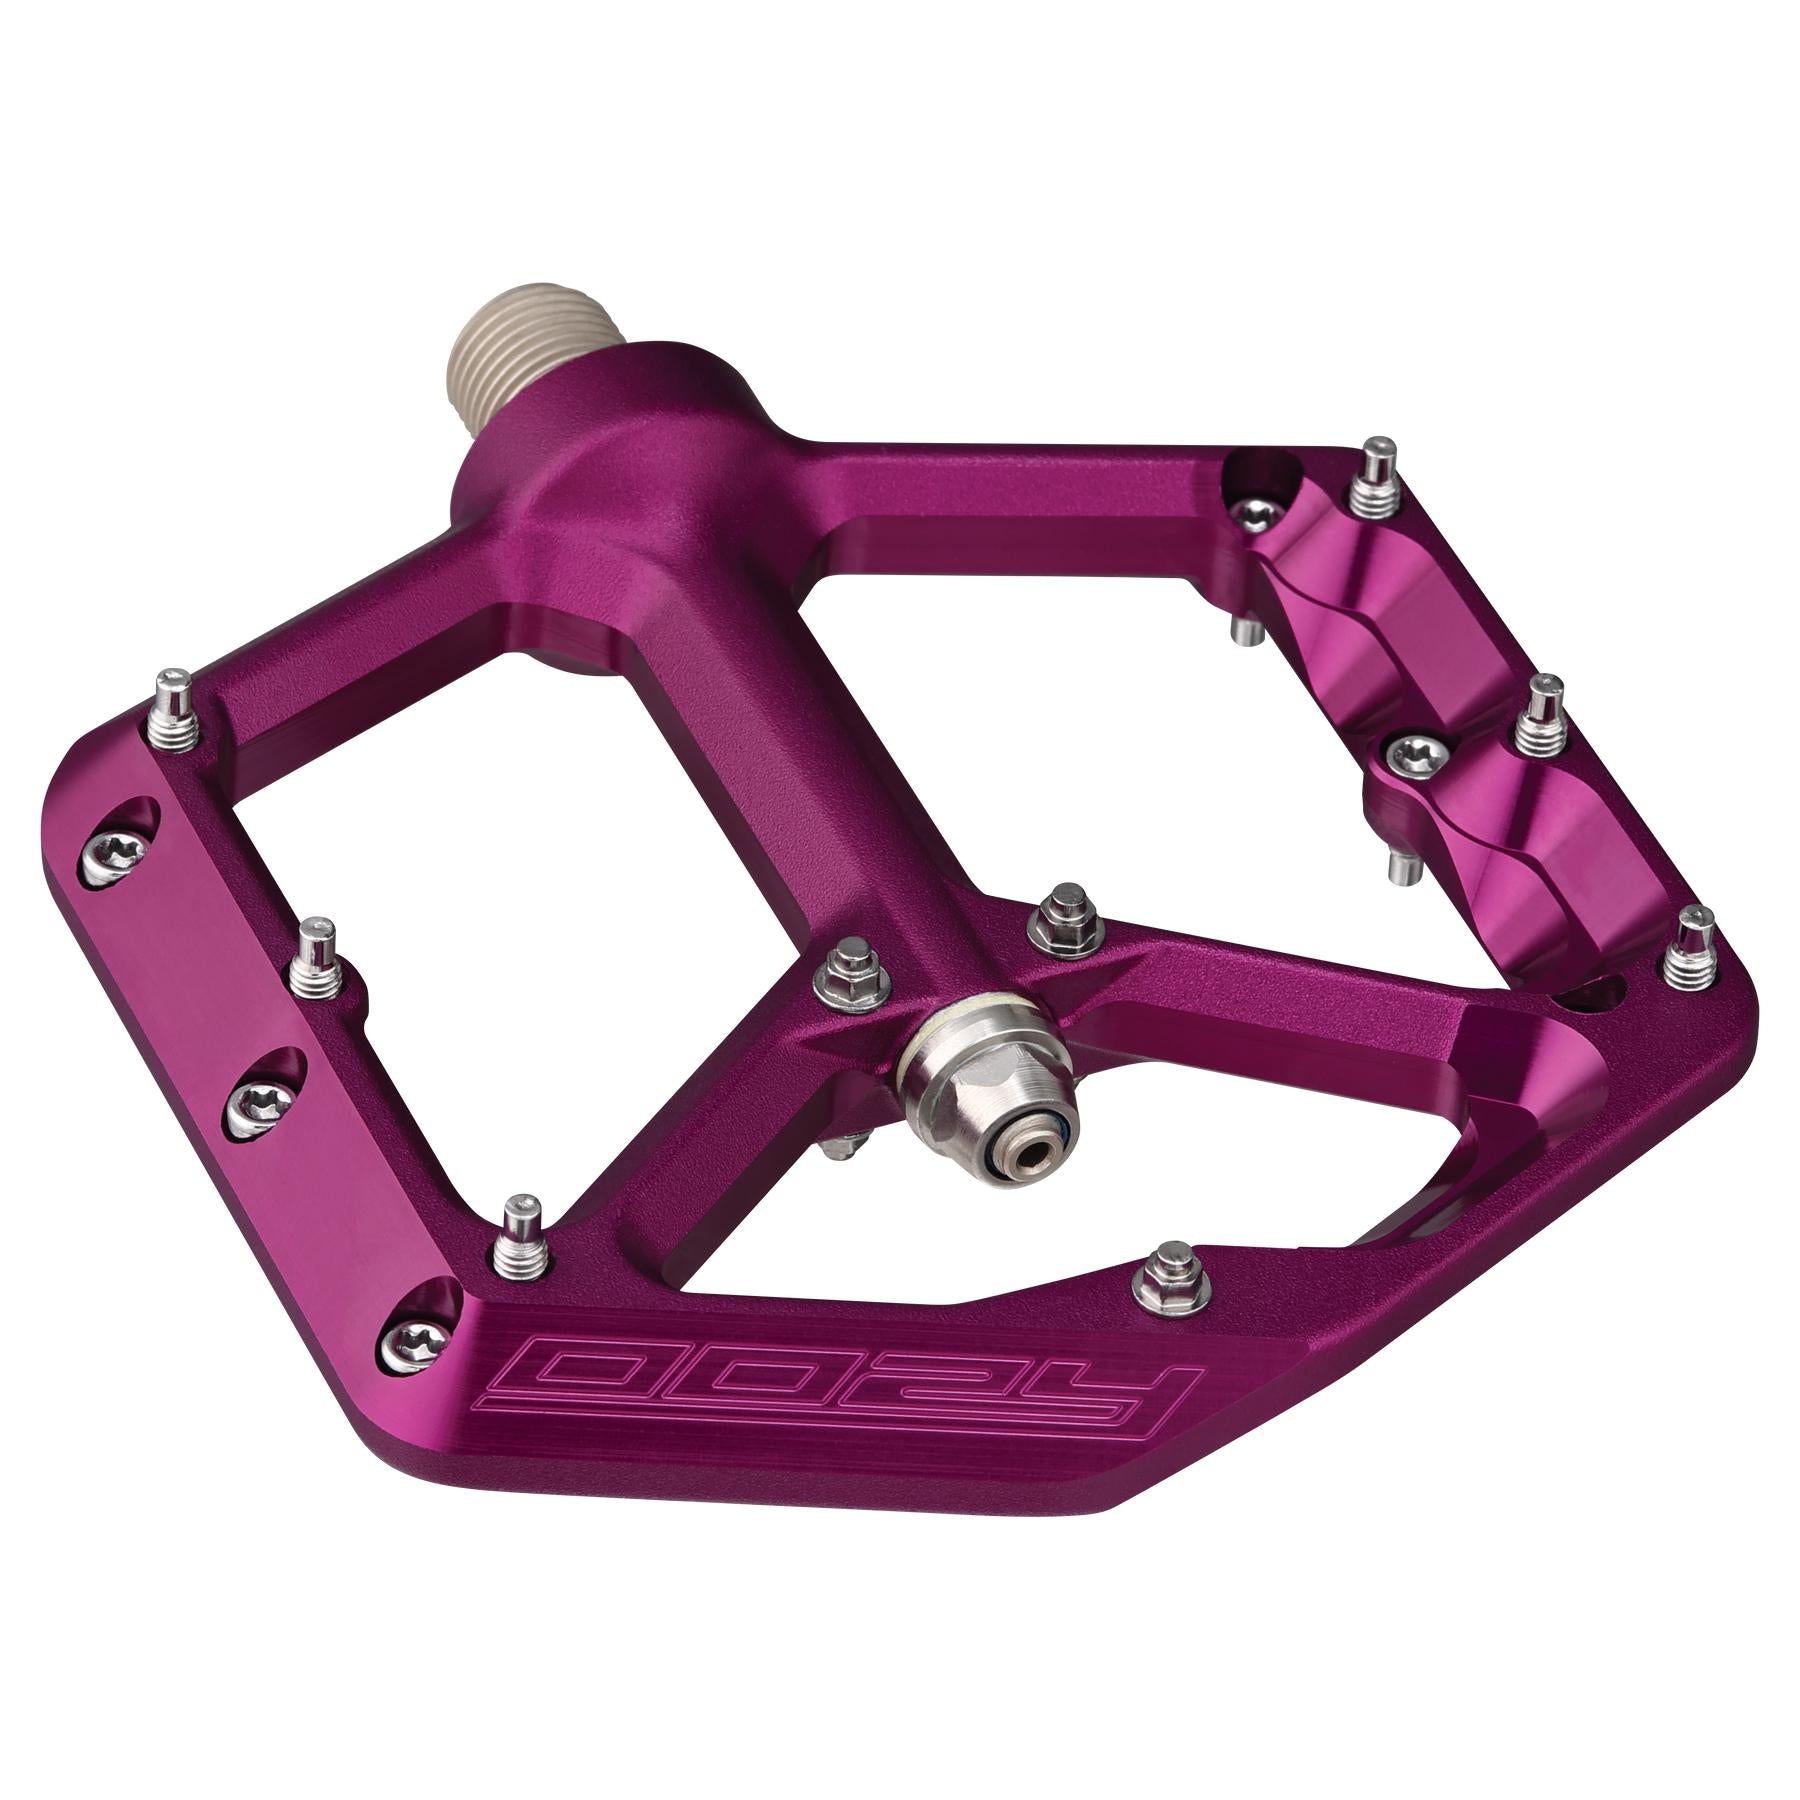 Spank Oozy Reboot Mountain Bike Pedals, Purple - Pedals - Bicycle Warehouse